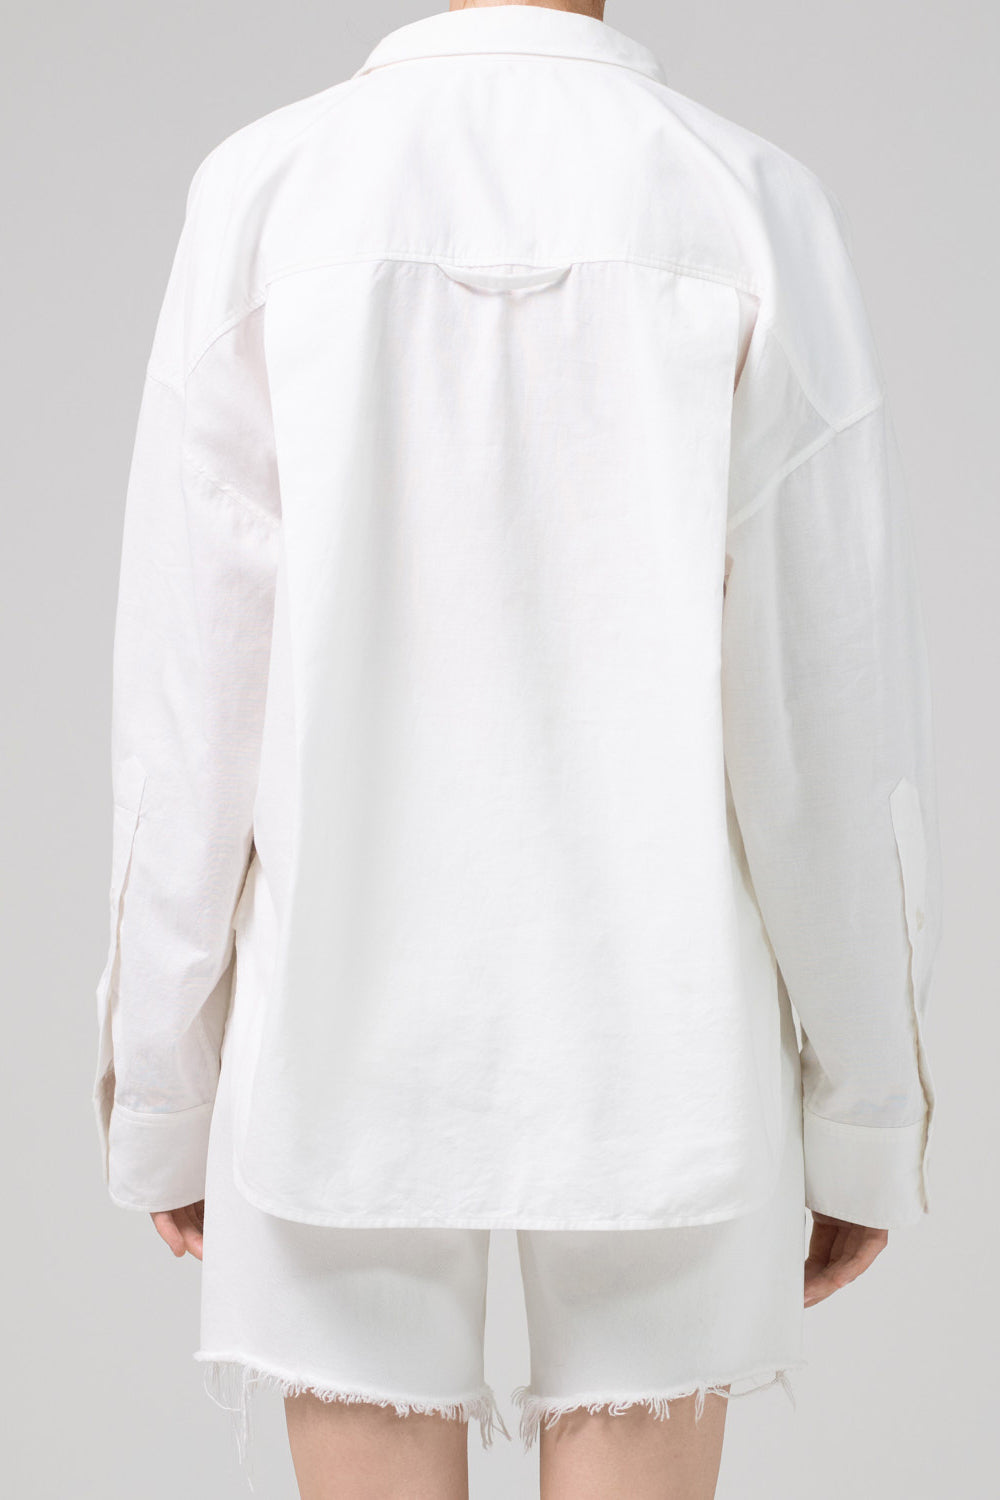 Citizens-of-Humanity-Brinkley-Shirt-Oxford-White